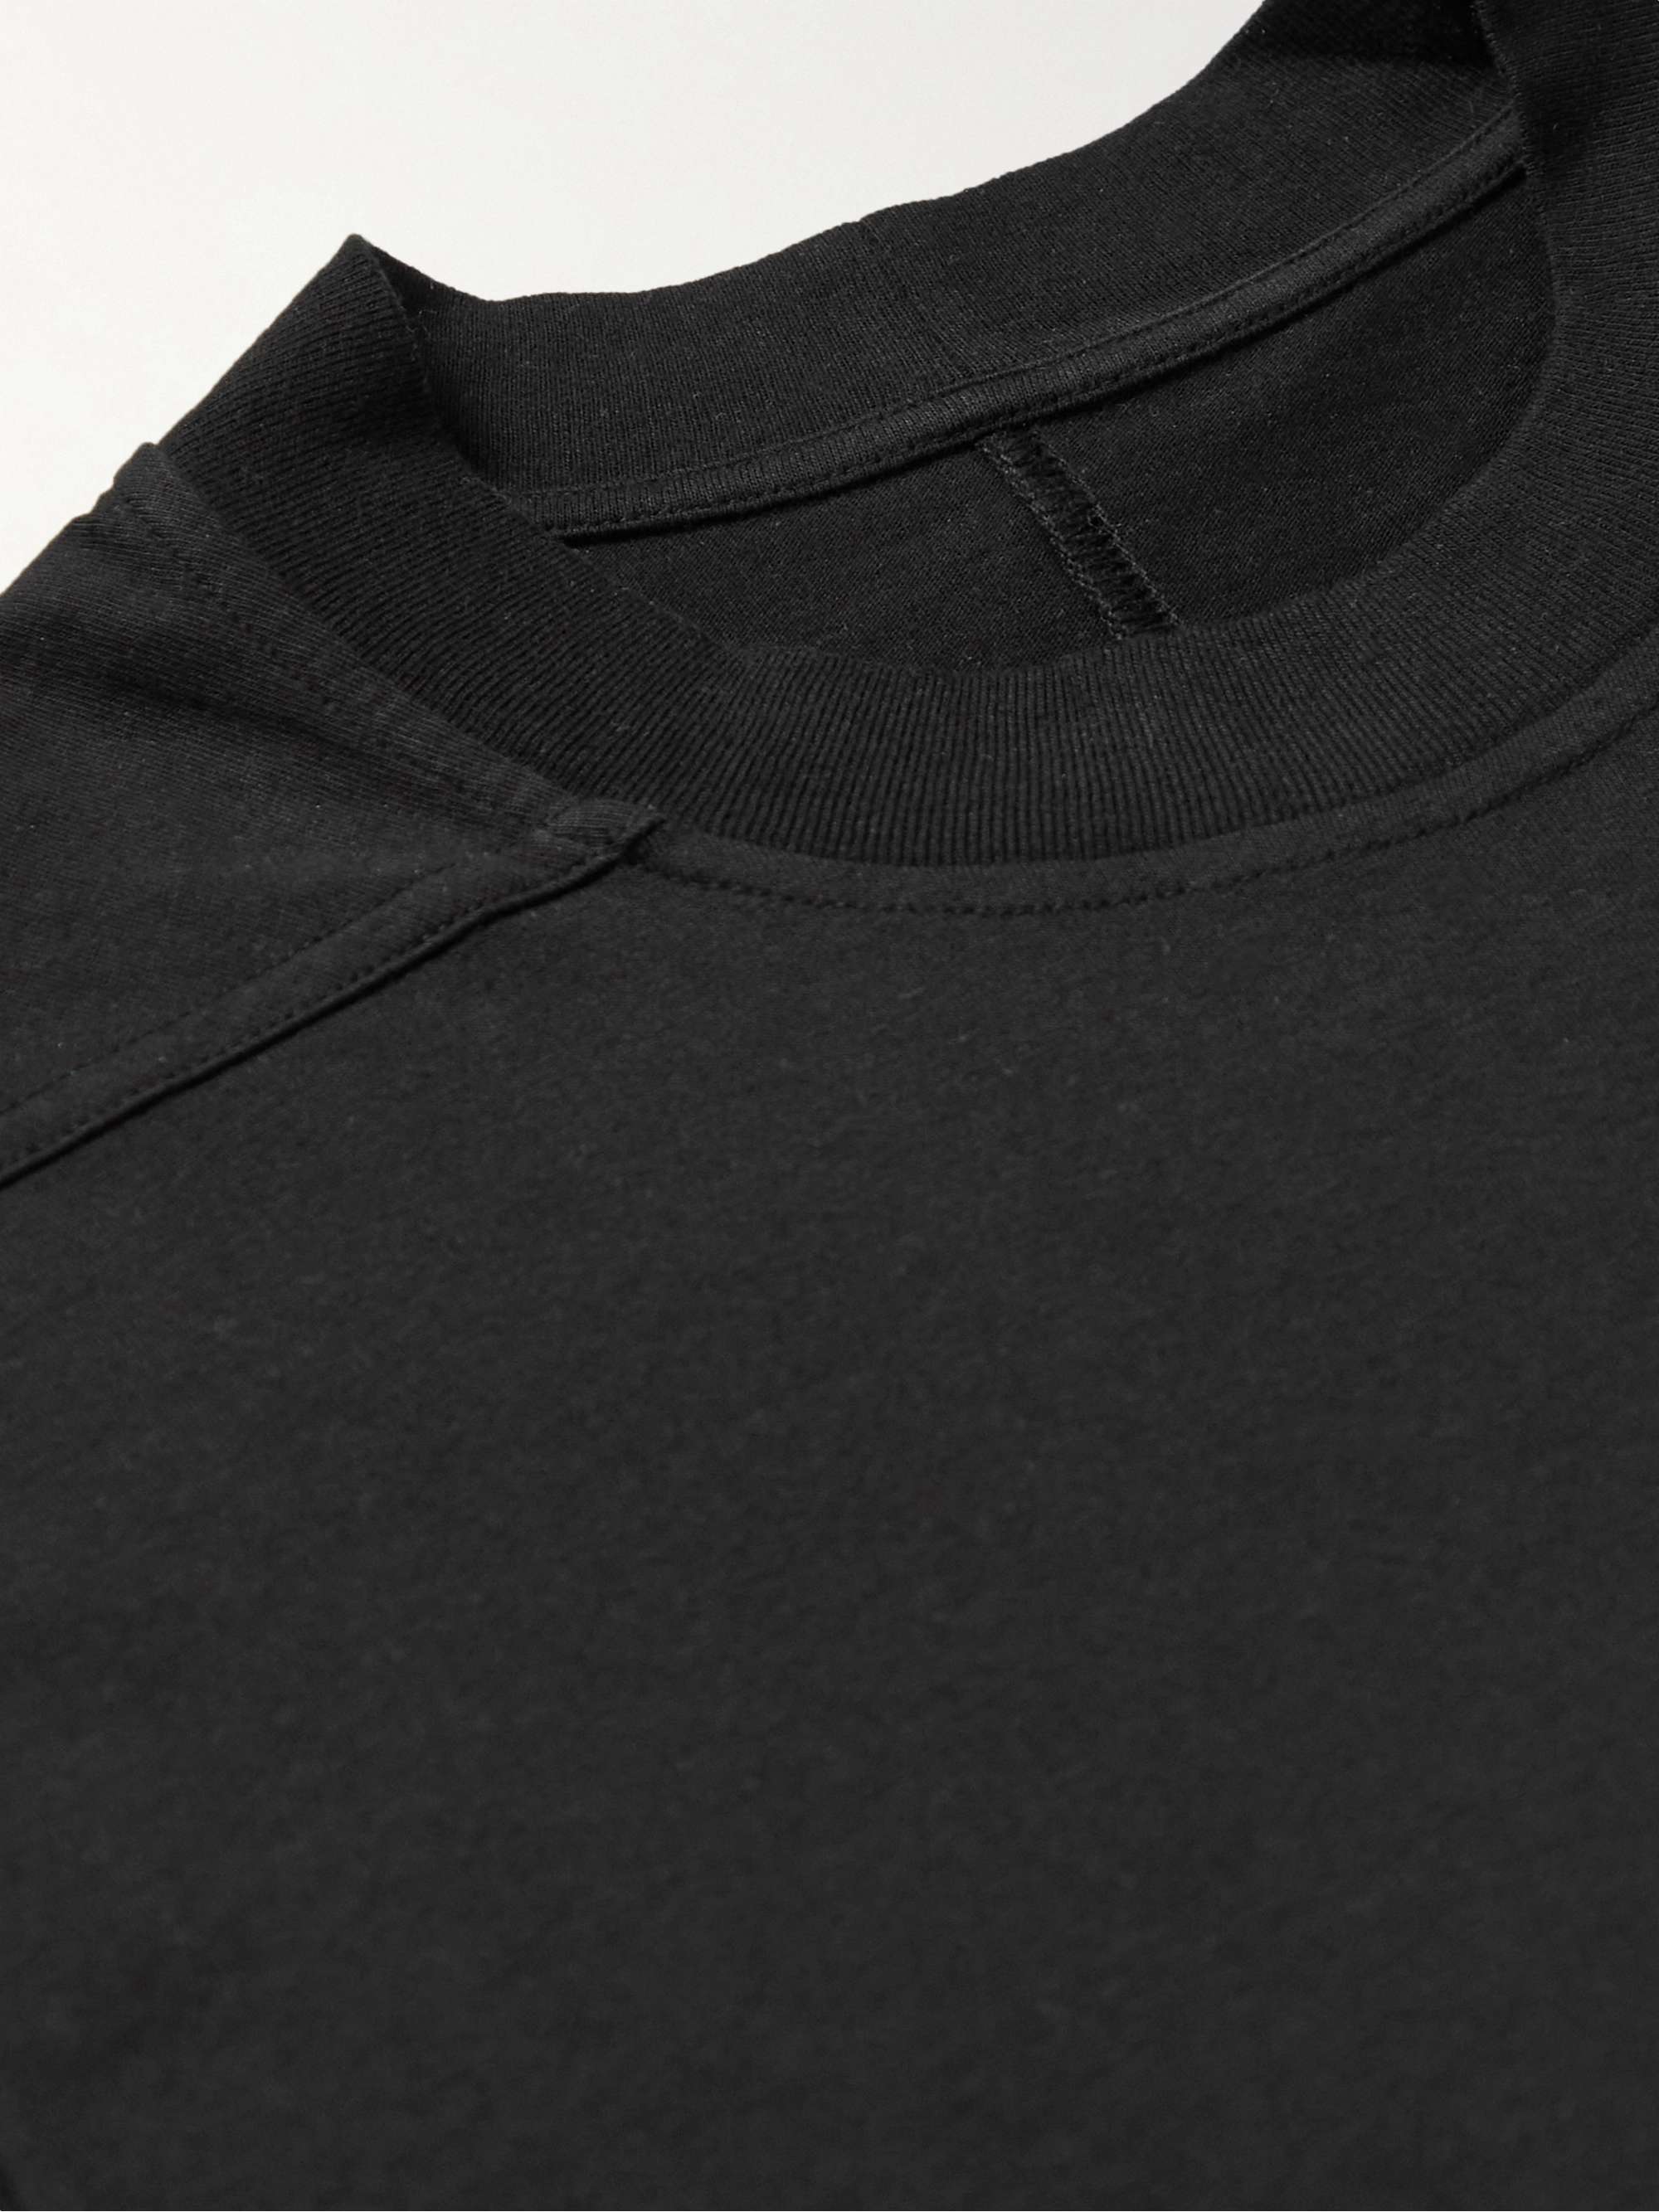 DRKSHDW BY RICK OWENS Printed Cotton-Jersey T-Shirt